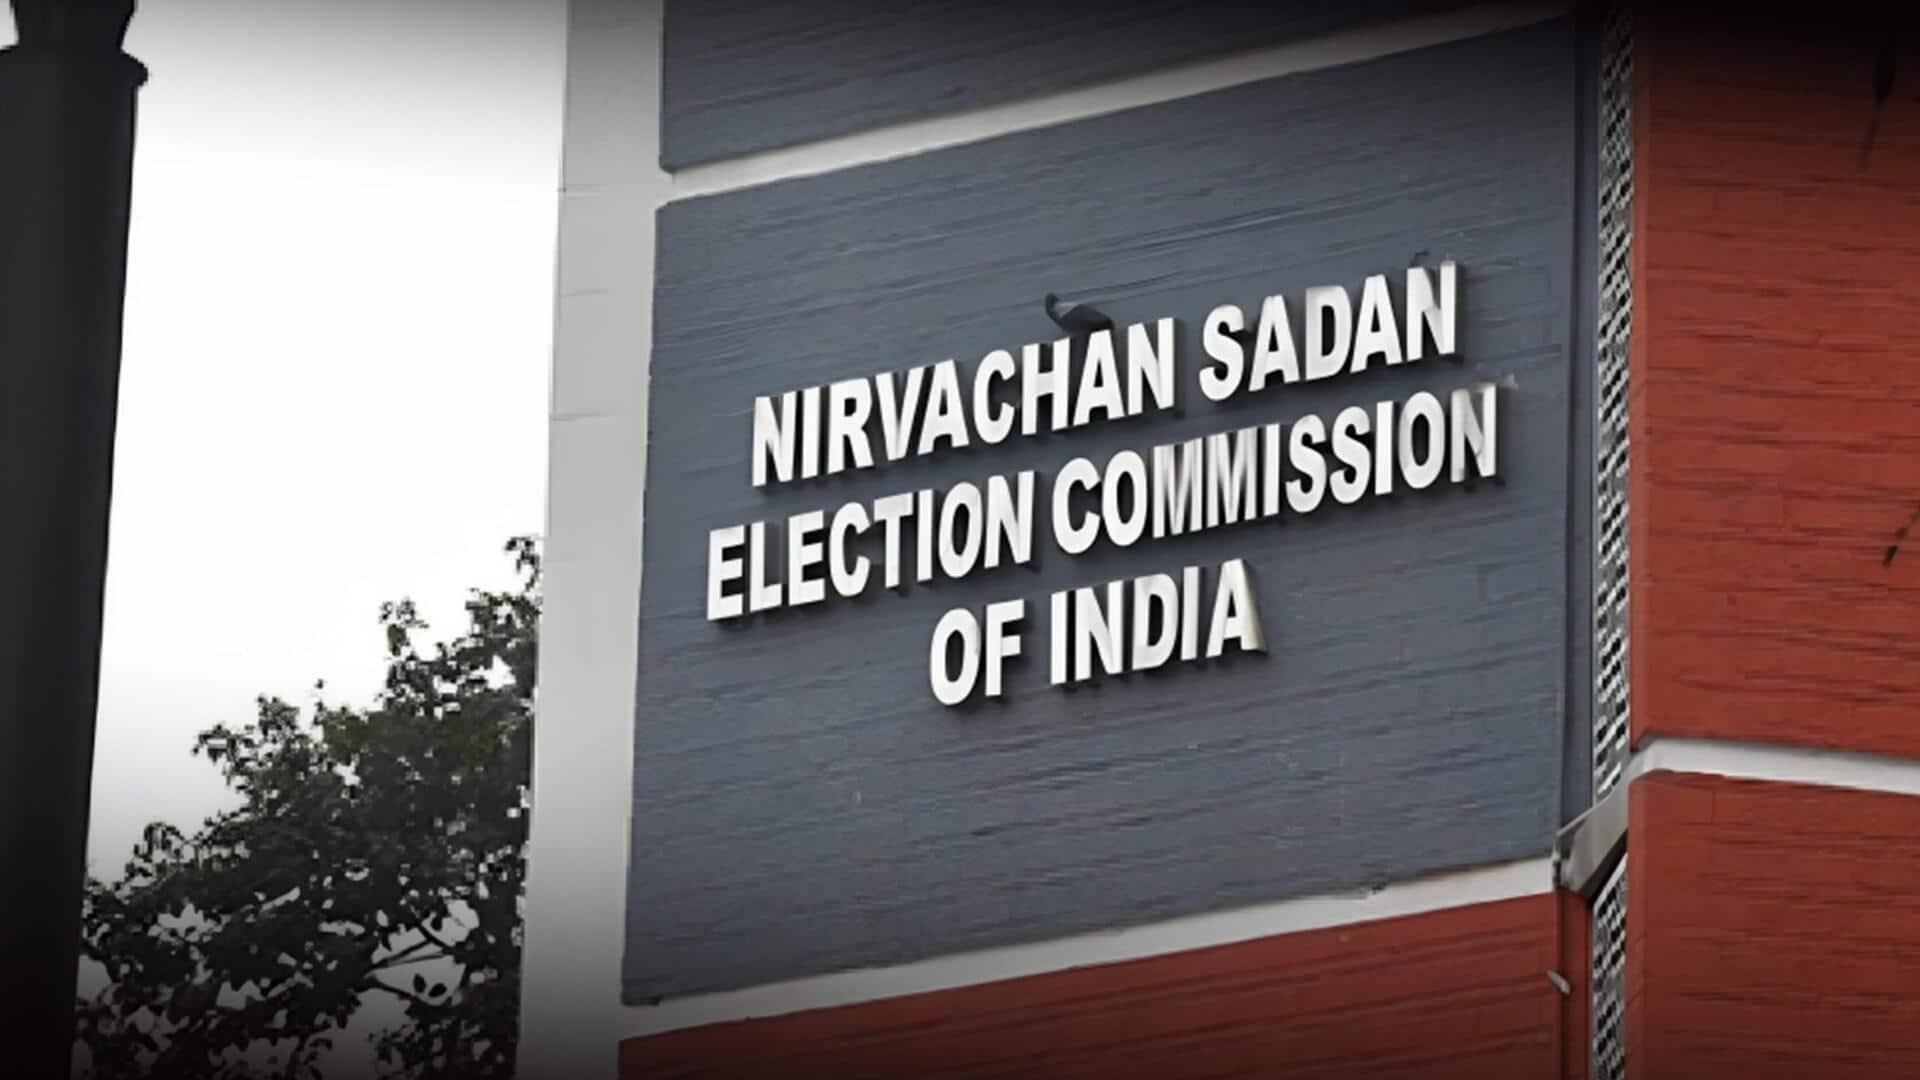 ECI rescues 3 abducted TDP polling agents in Andhra Pradesh